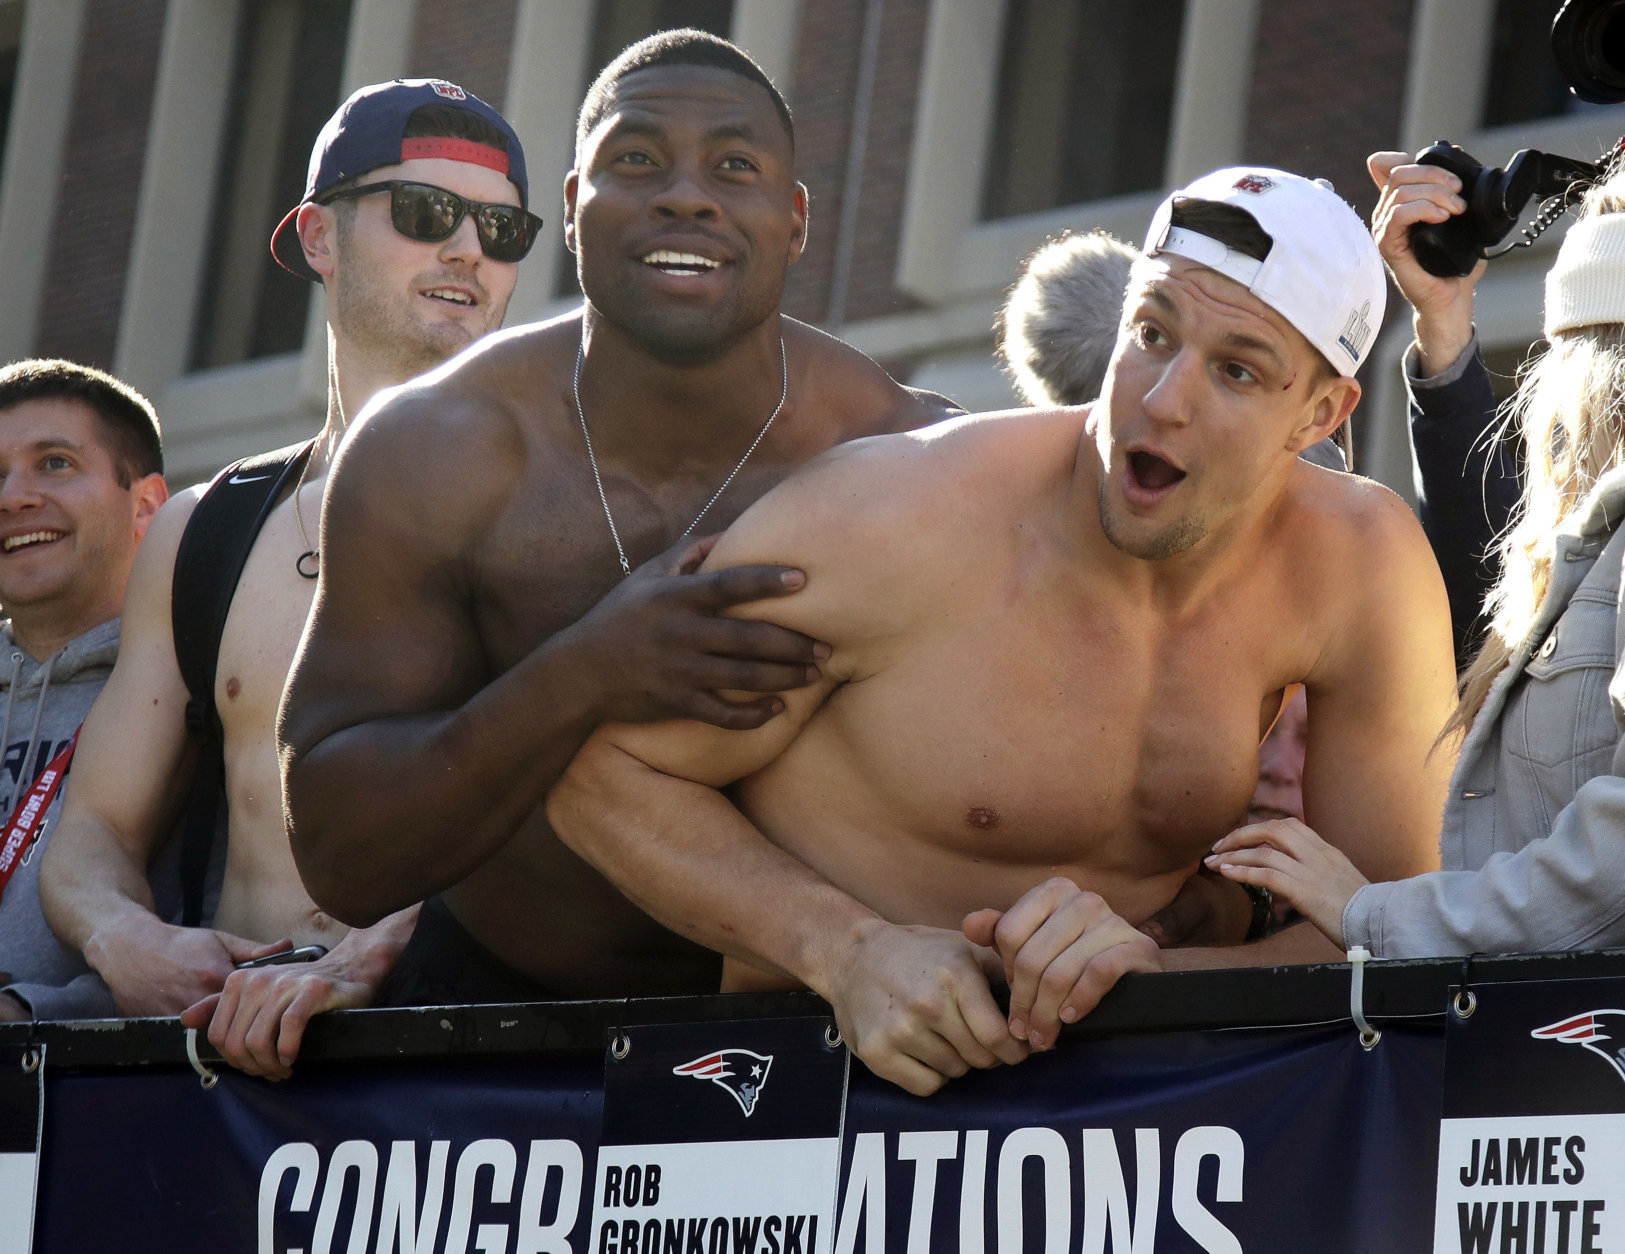 New England Patriots tight ends Dwayne Allen, left, and Rob Gronkowski react to fans during their victory parade through downtown Boston, Tuesday, Feb. 5, 2019, to celebrate their win over the Los Angeles Rams in Sunday's NFL Super Bowl 53 football game in Atlanta. The Patriots have won six Super Bowl championships. (AP Photo/Elise Amendola)